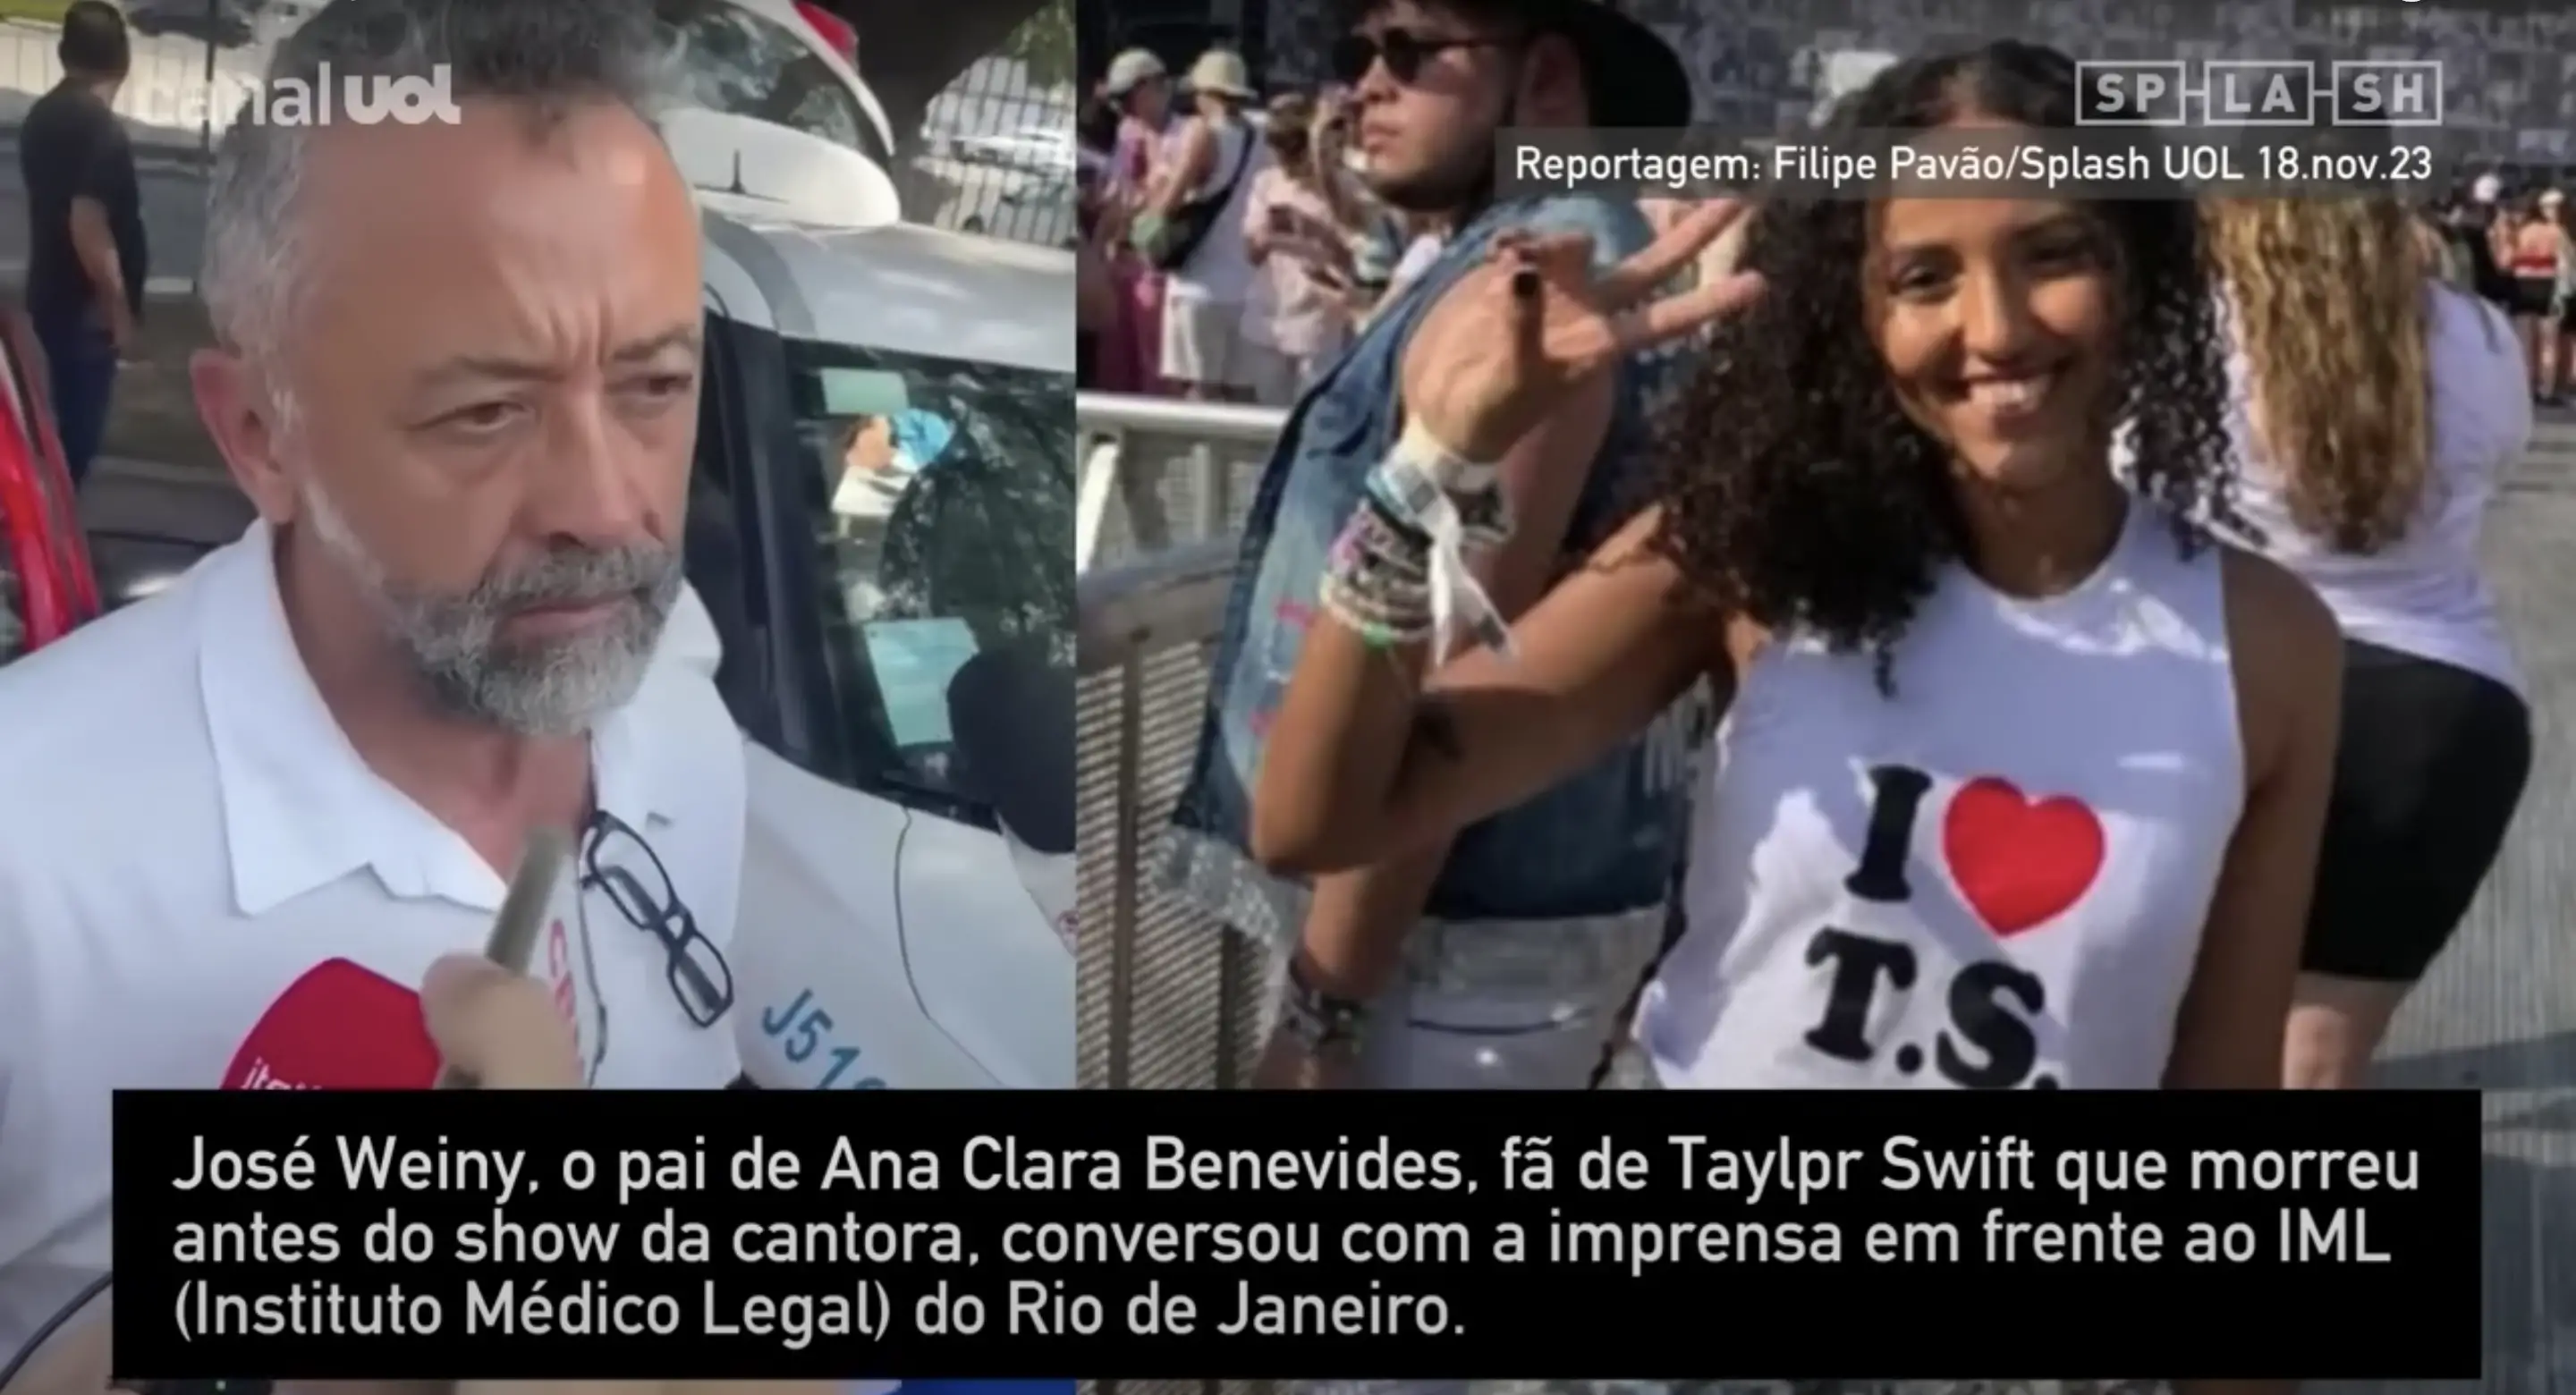 Weiny Machado, father of Ana Clara Benedives Machado, gives interview after her passing | Source: Youtube.com/@uol